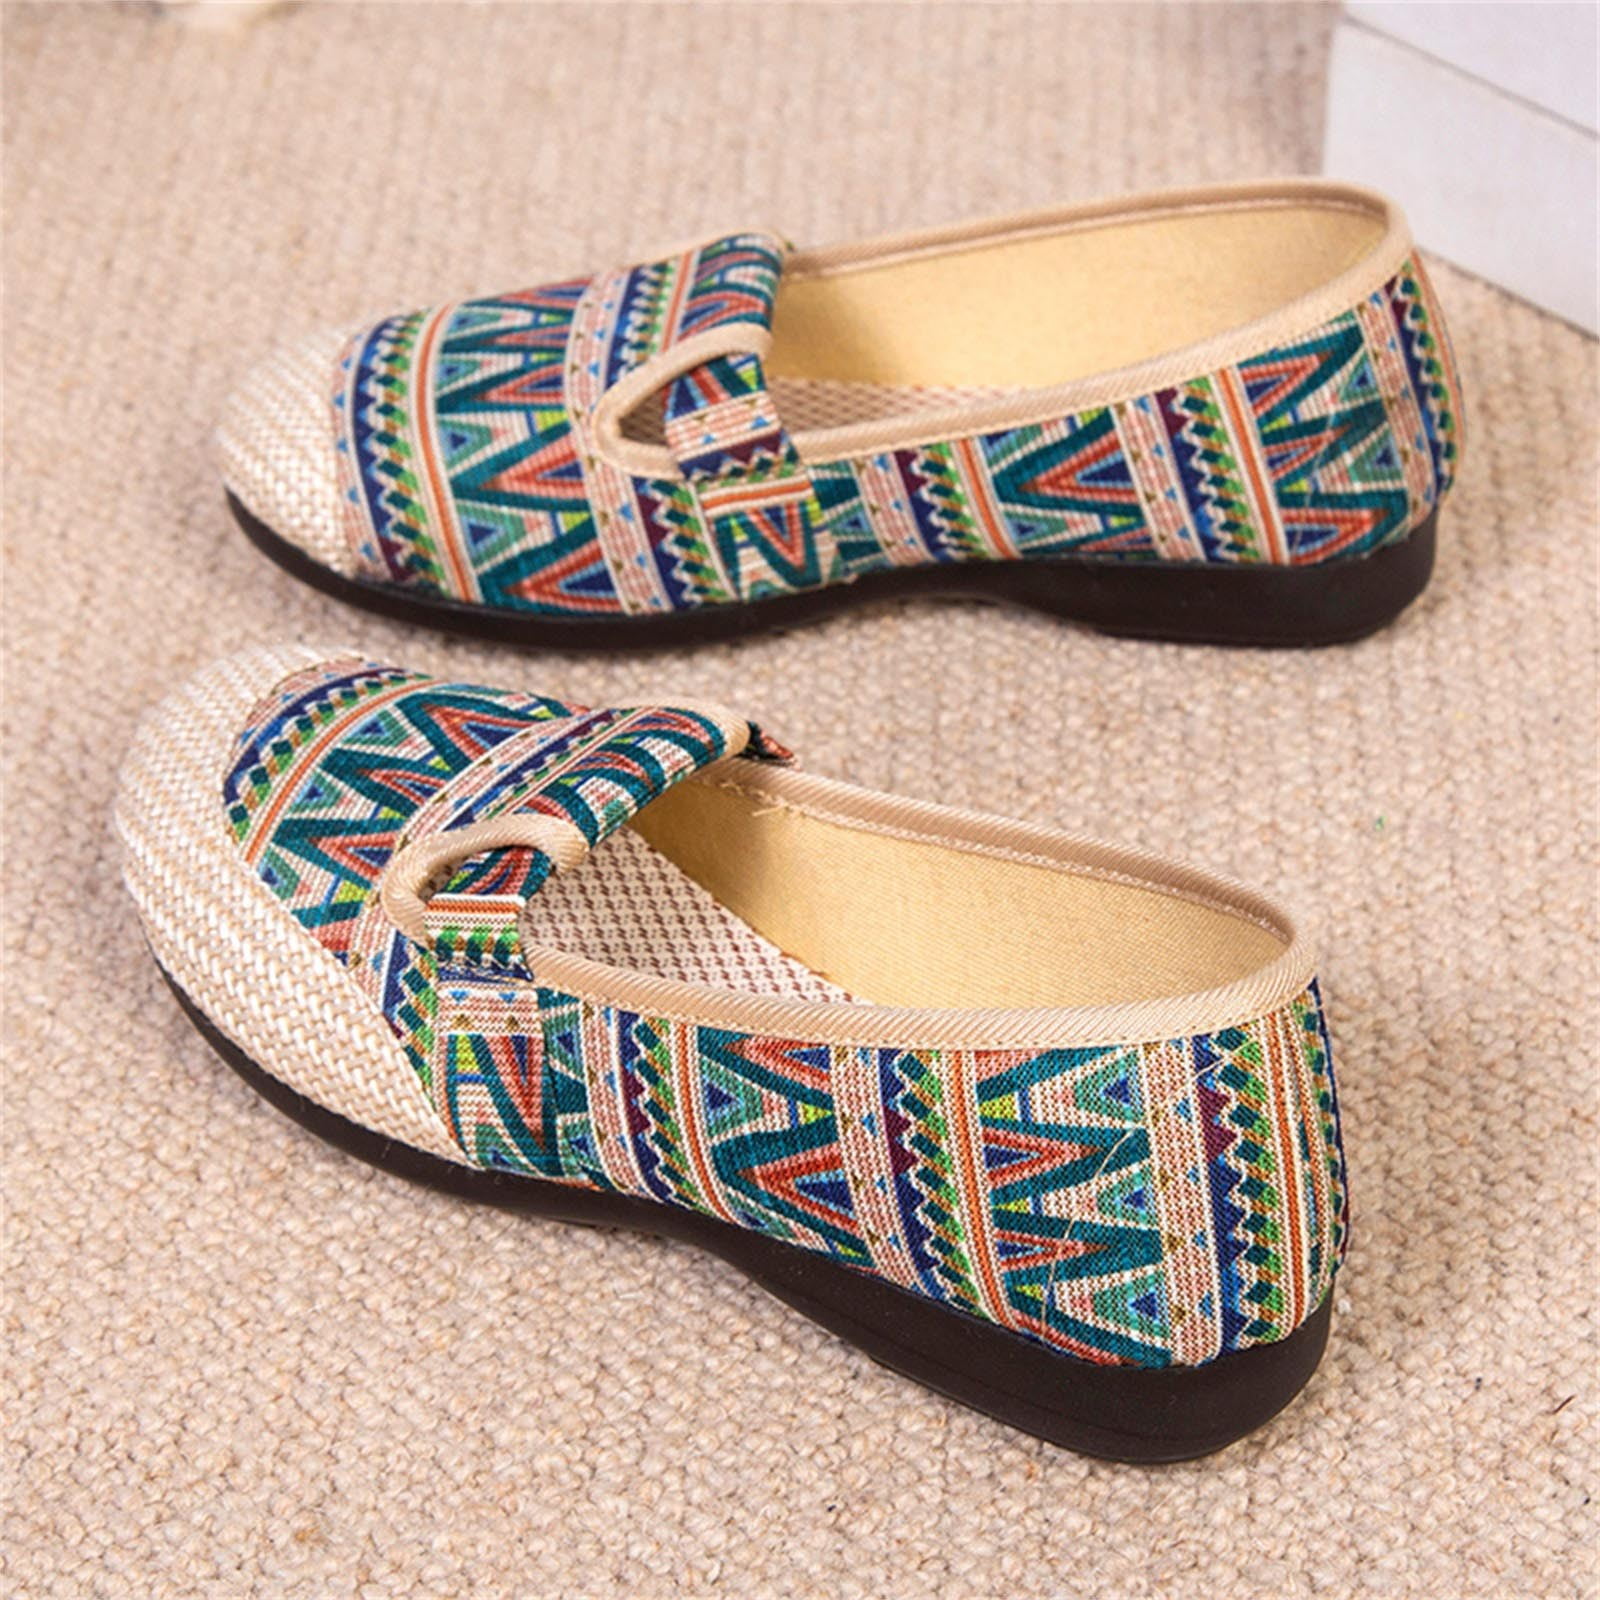 Green St Patricks Day Ethnic Pattern Casual Womens Extra Light Flat Boat Shoes Girls Loafer Shoes 